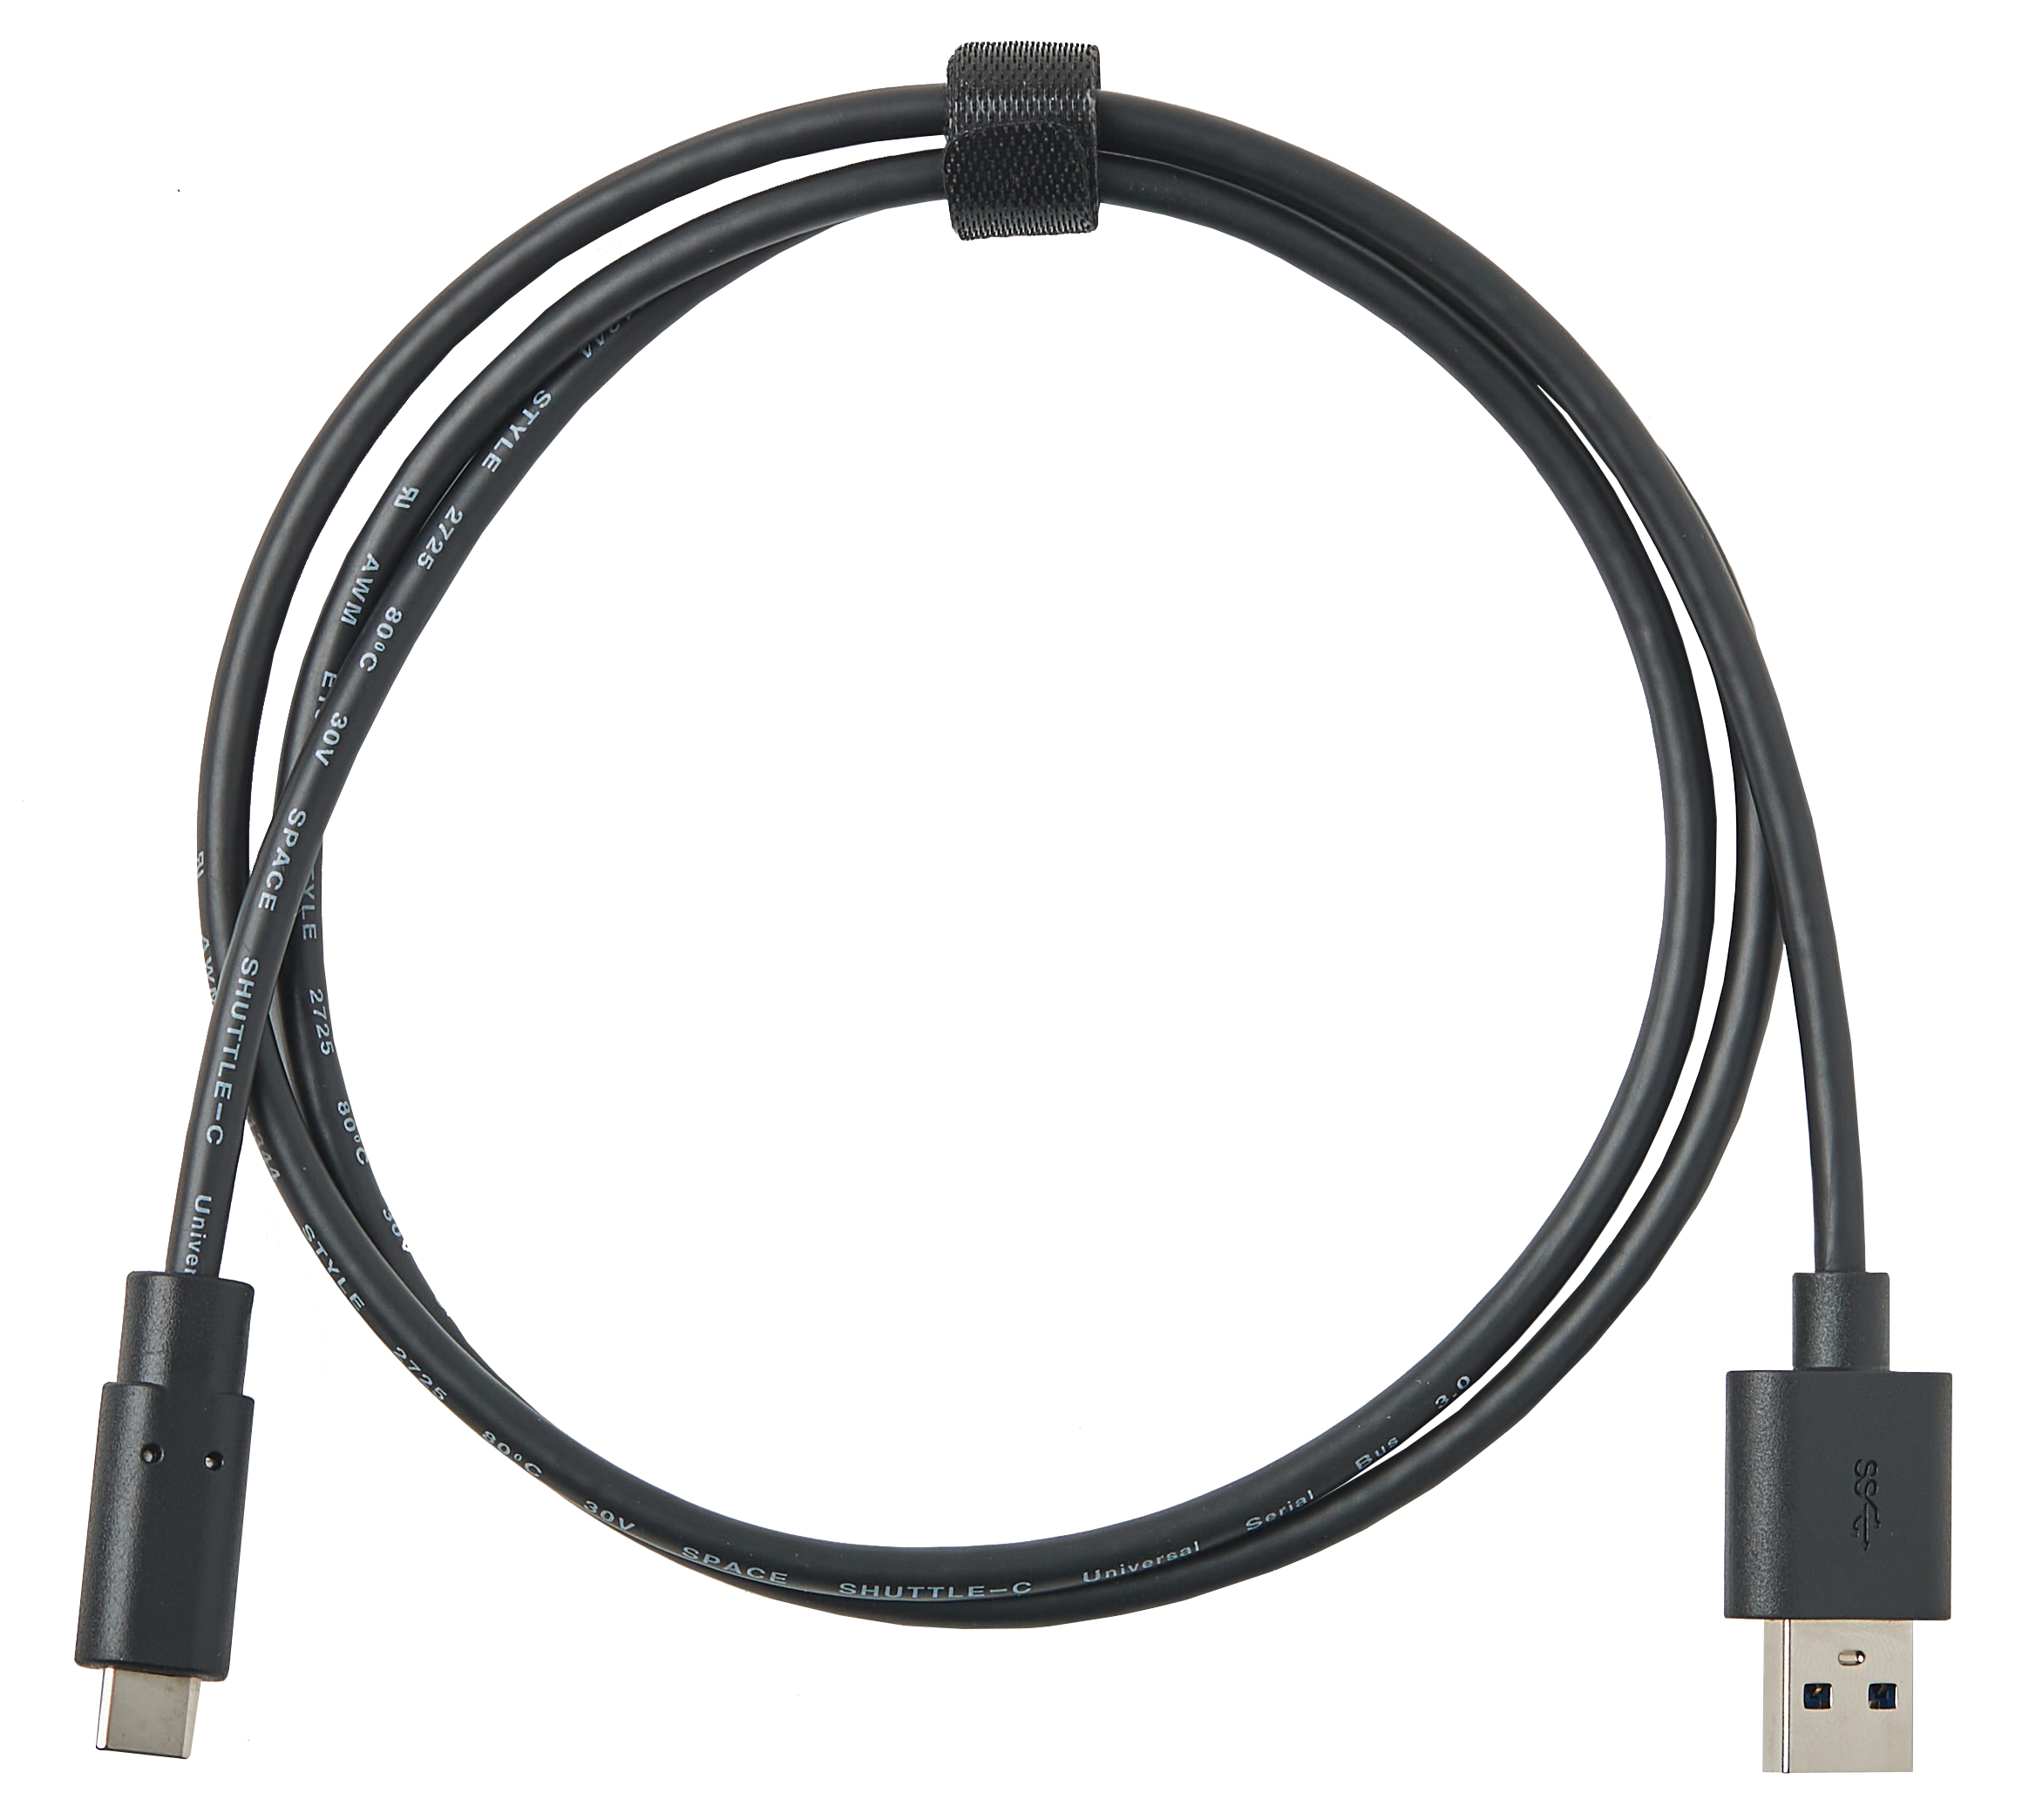 https://www.cad-ray.com/wp-content/uploads/2021/04/i700_USB-3.0-cable.png